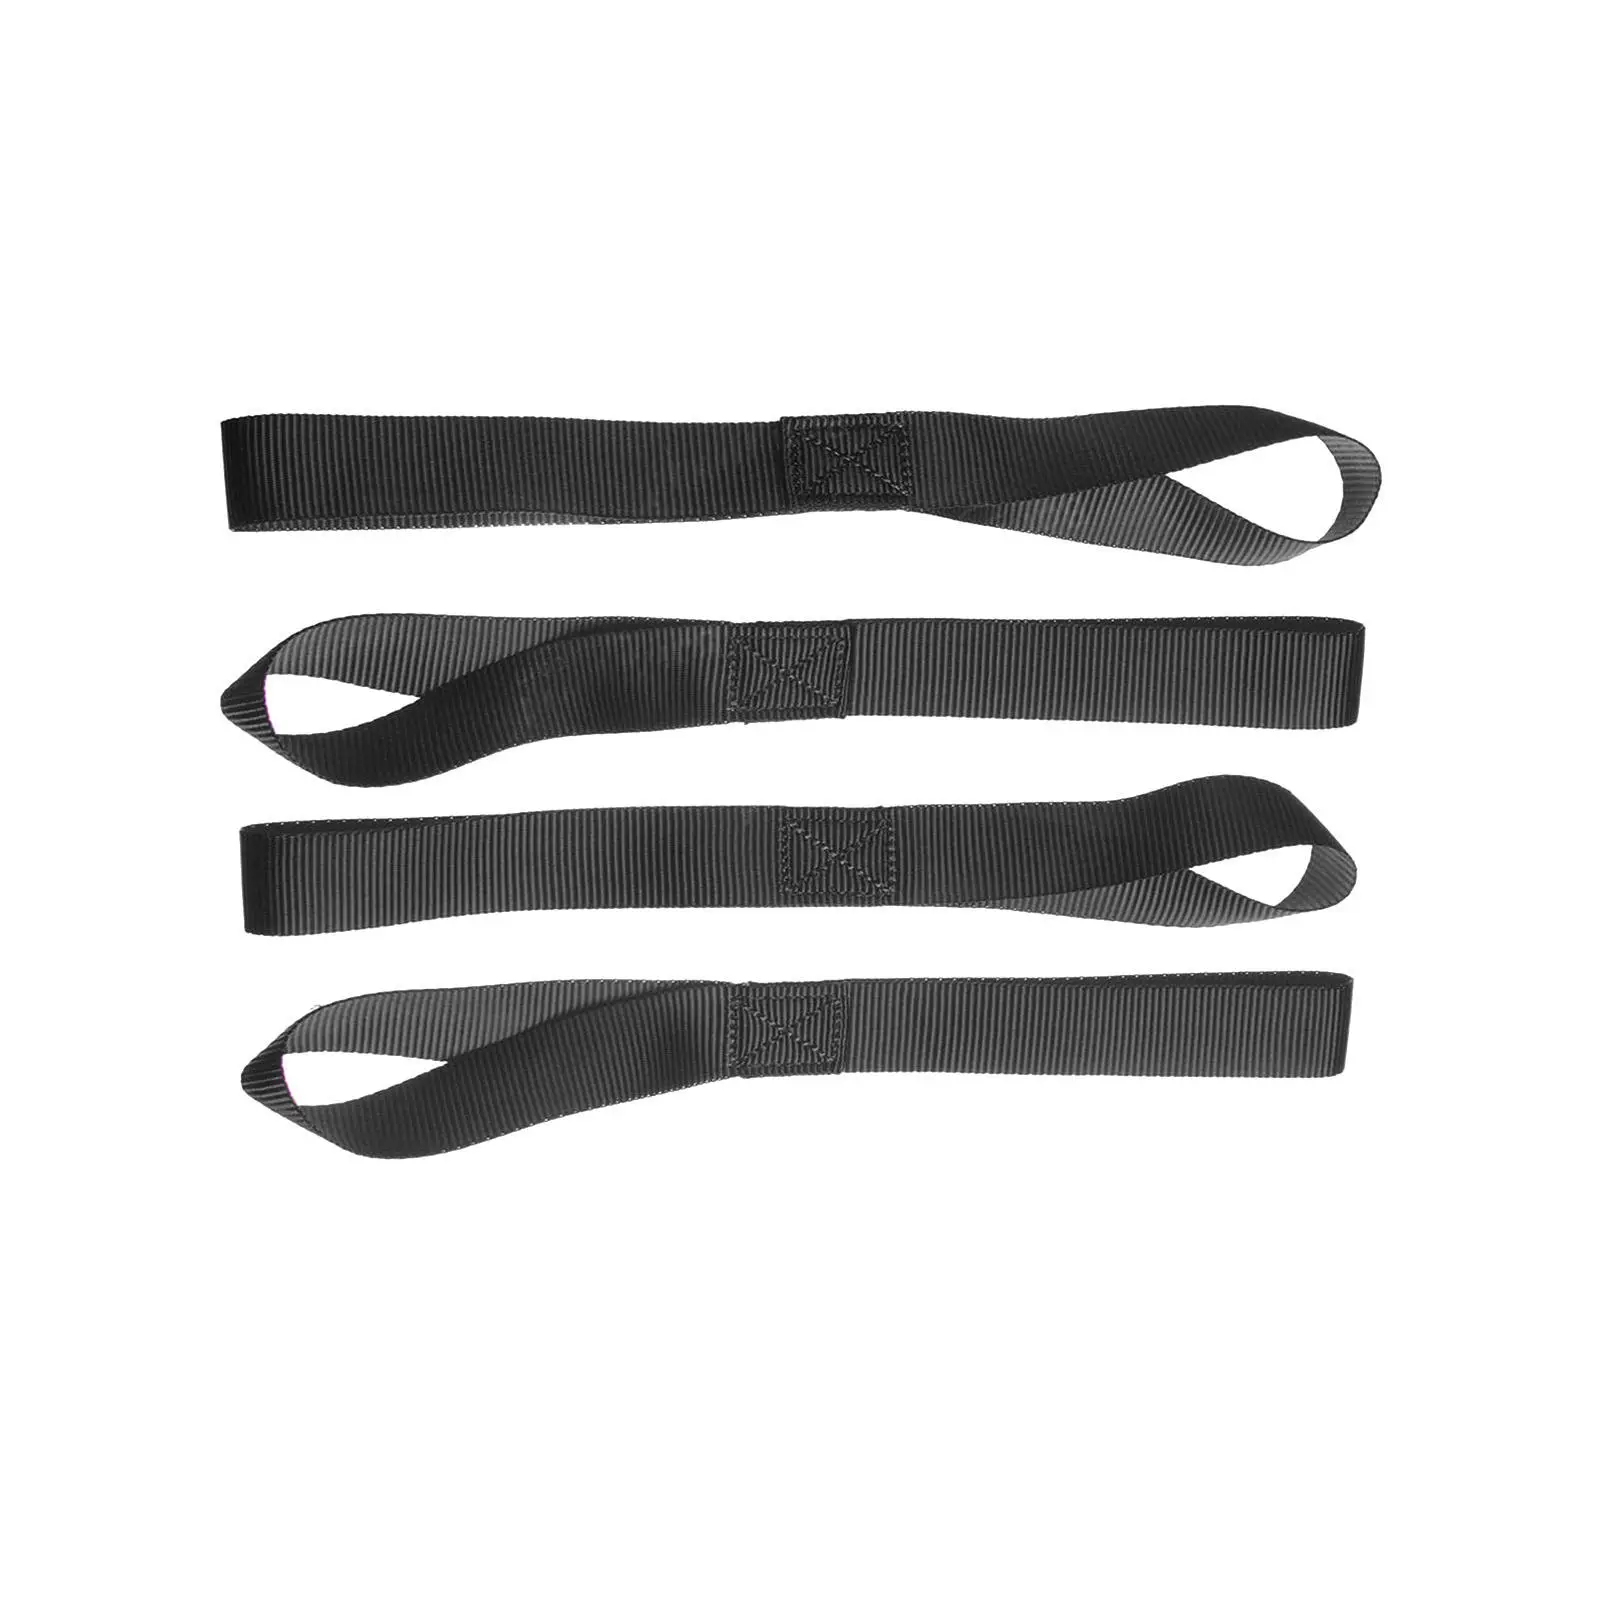 5x Soft Loop High Strength Vehicle Moving Owing Cargo Nylon Tie Down Straps